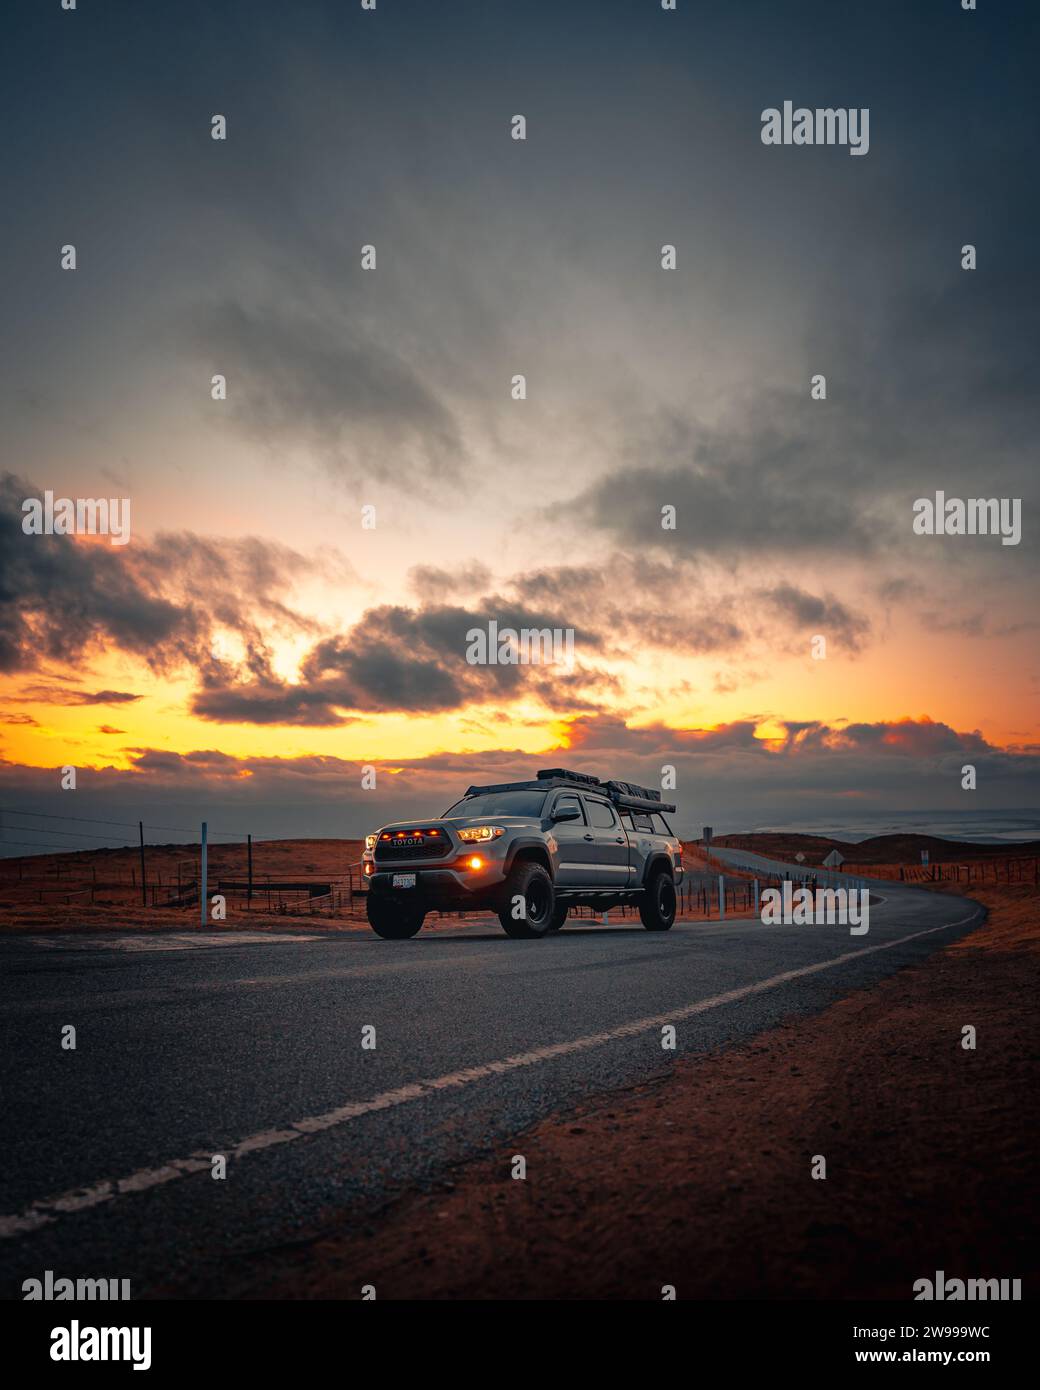 An SUV at sunset, illuminated by the warm golden rays of the setting sun Stock Photo